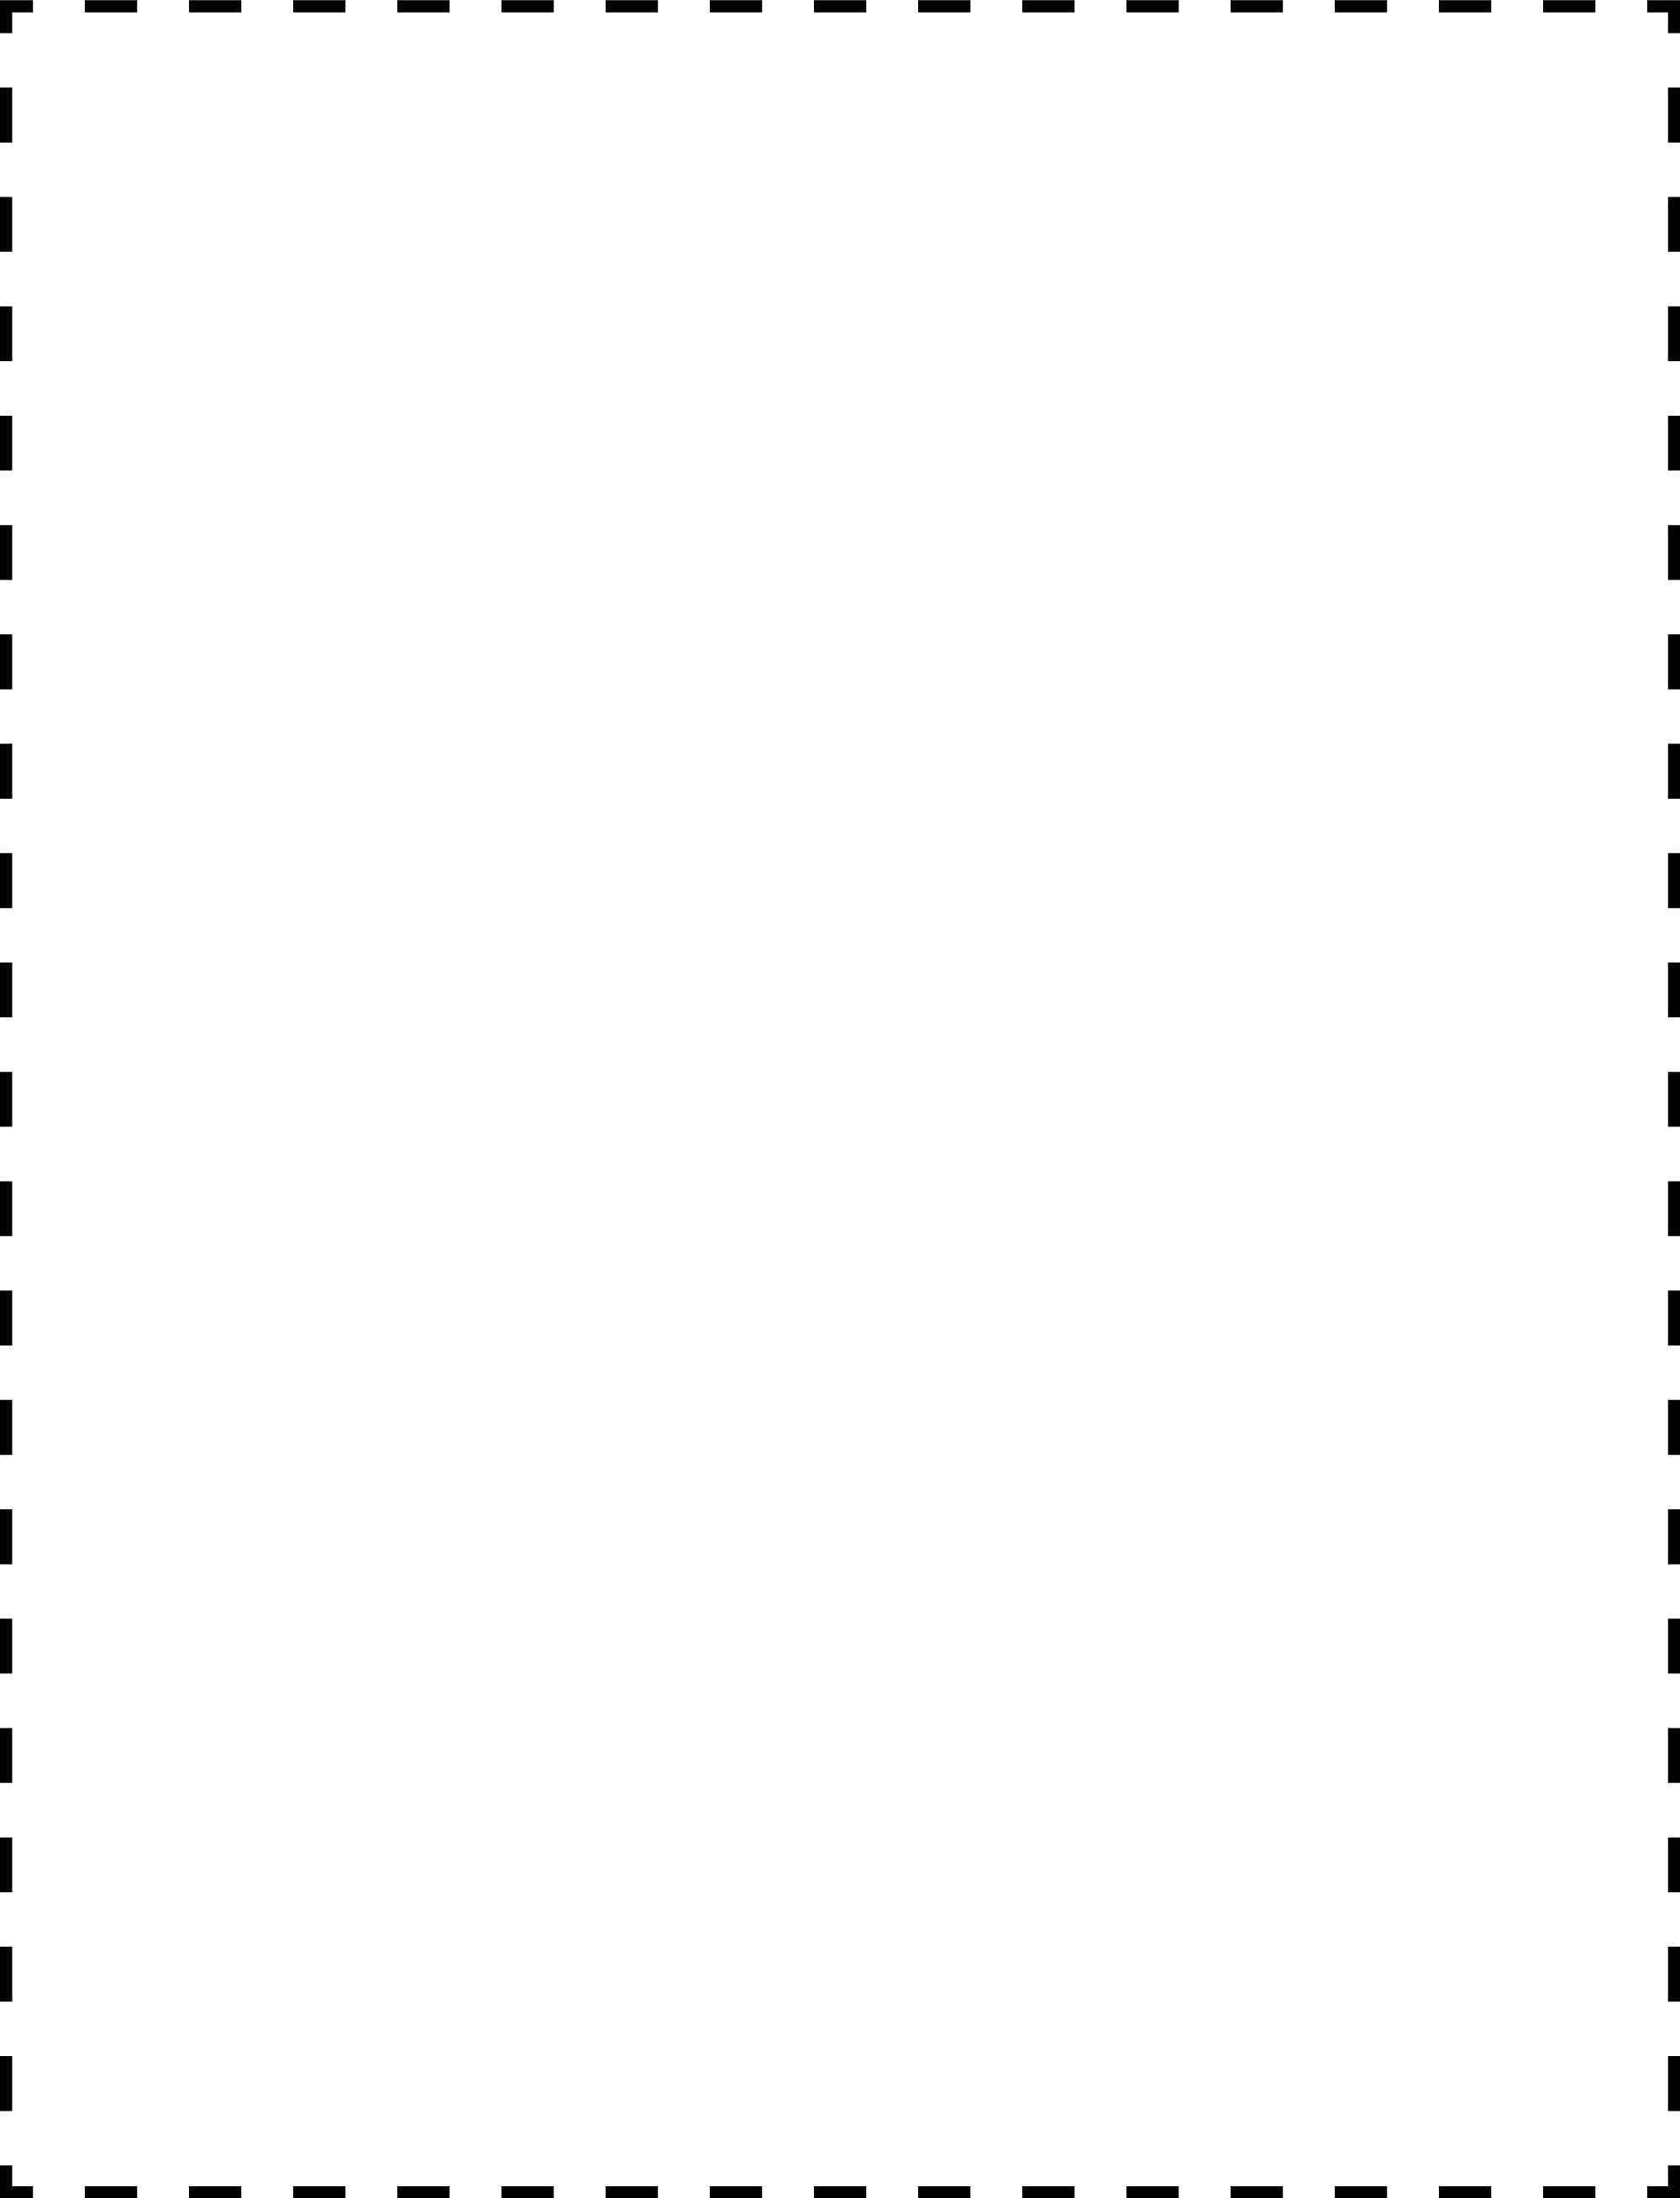 507-coupon-outline-4x5-k.png